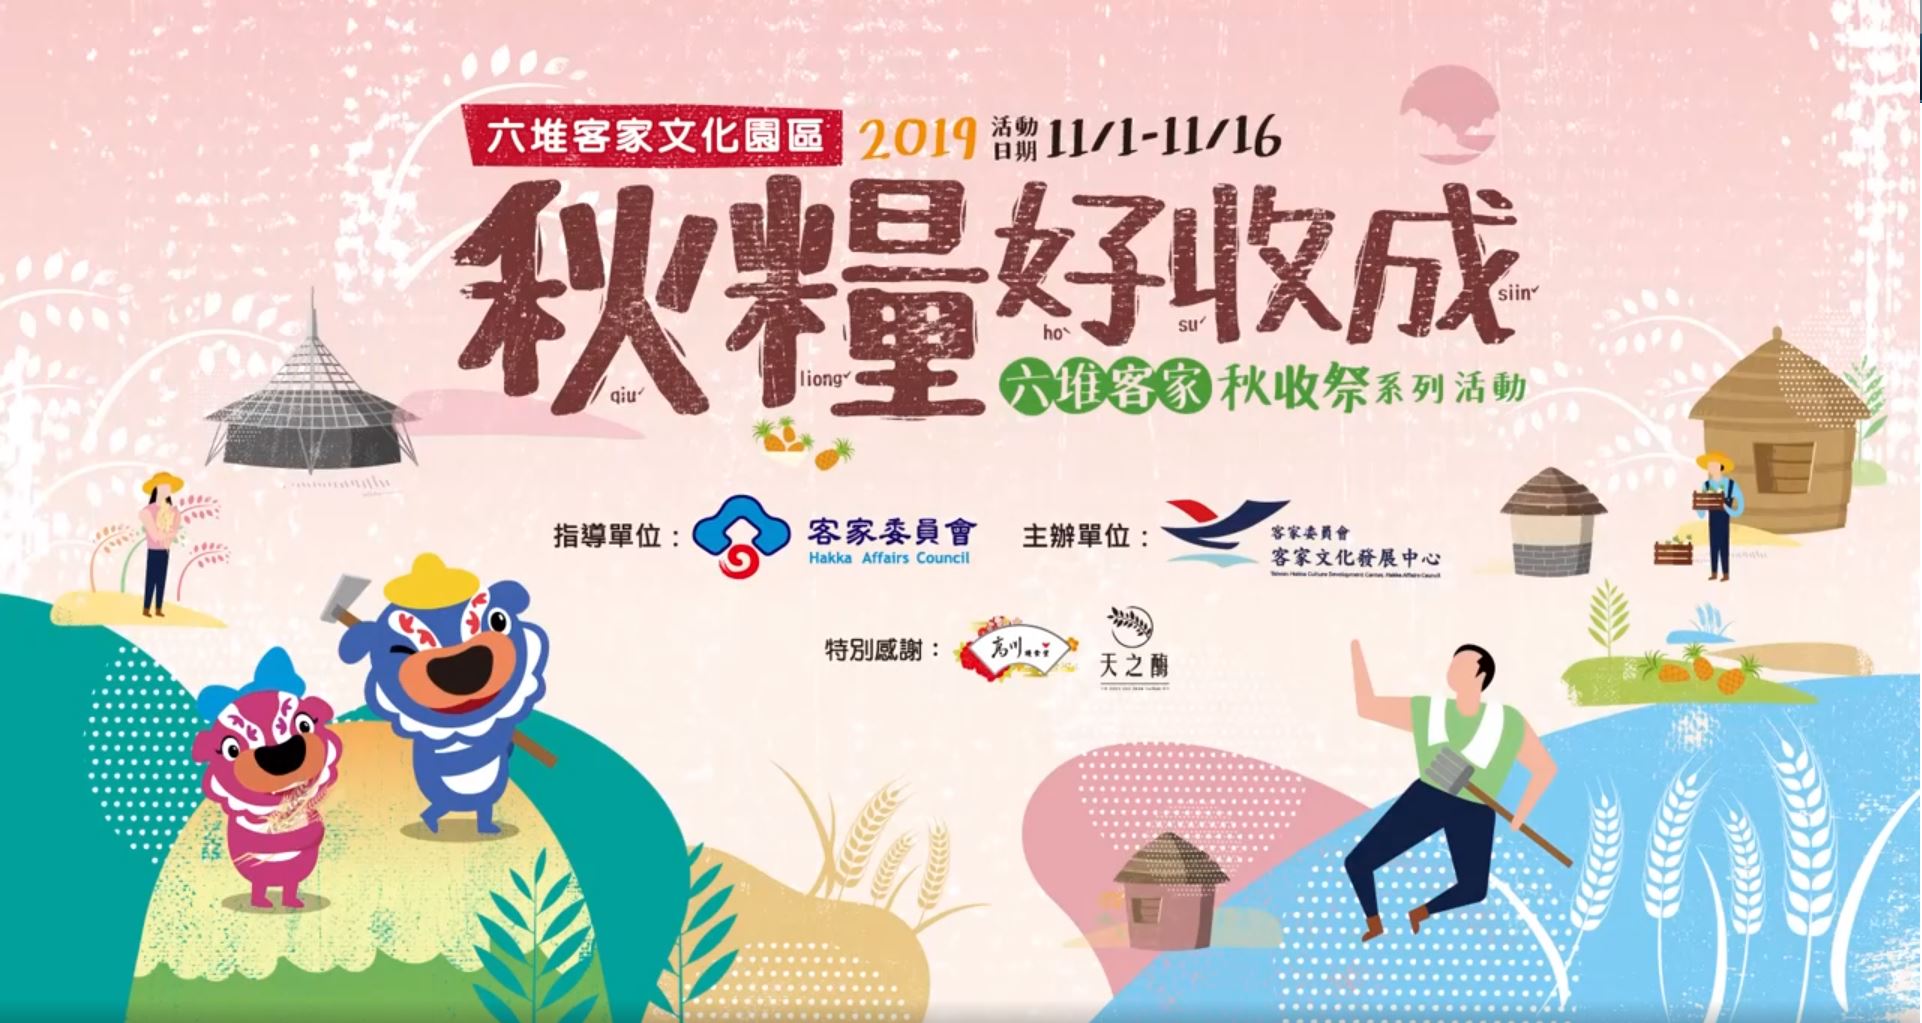 Video of 2019 events celebrating a bountiful grain harvest in autumn 展示圖